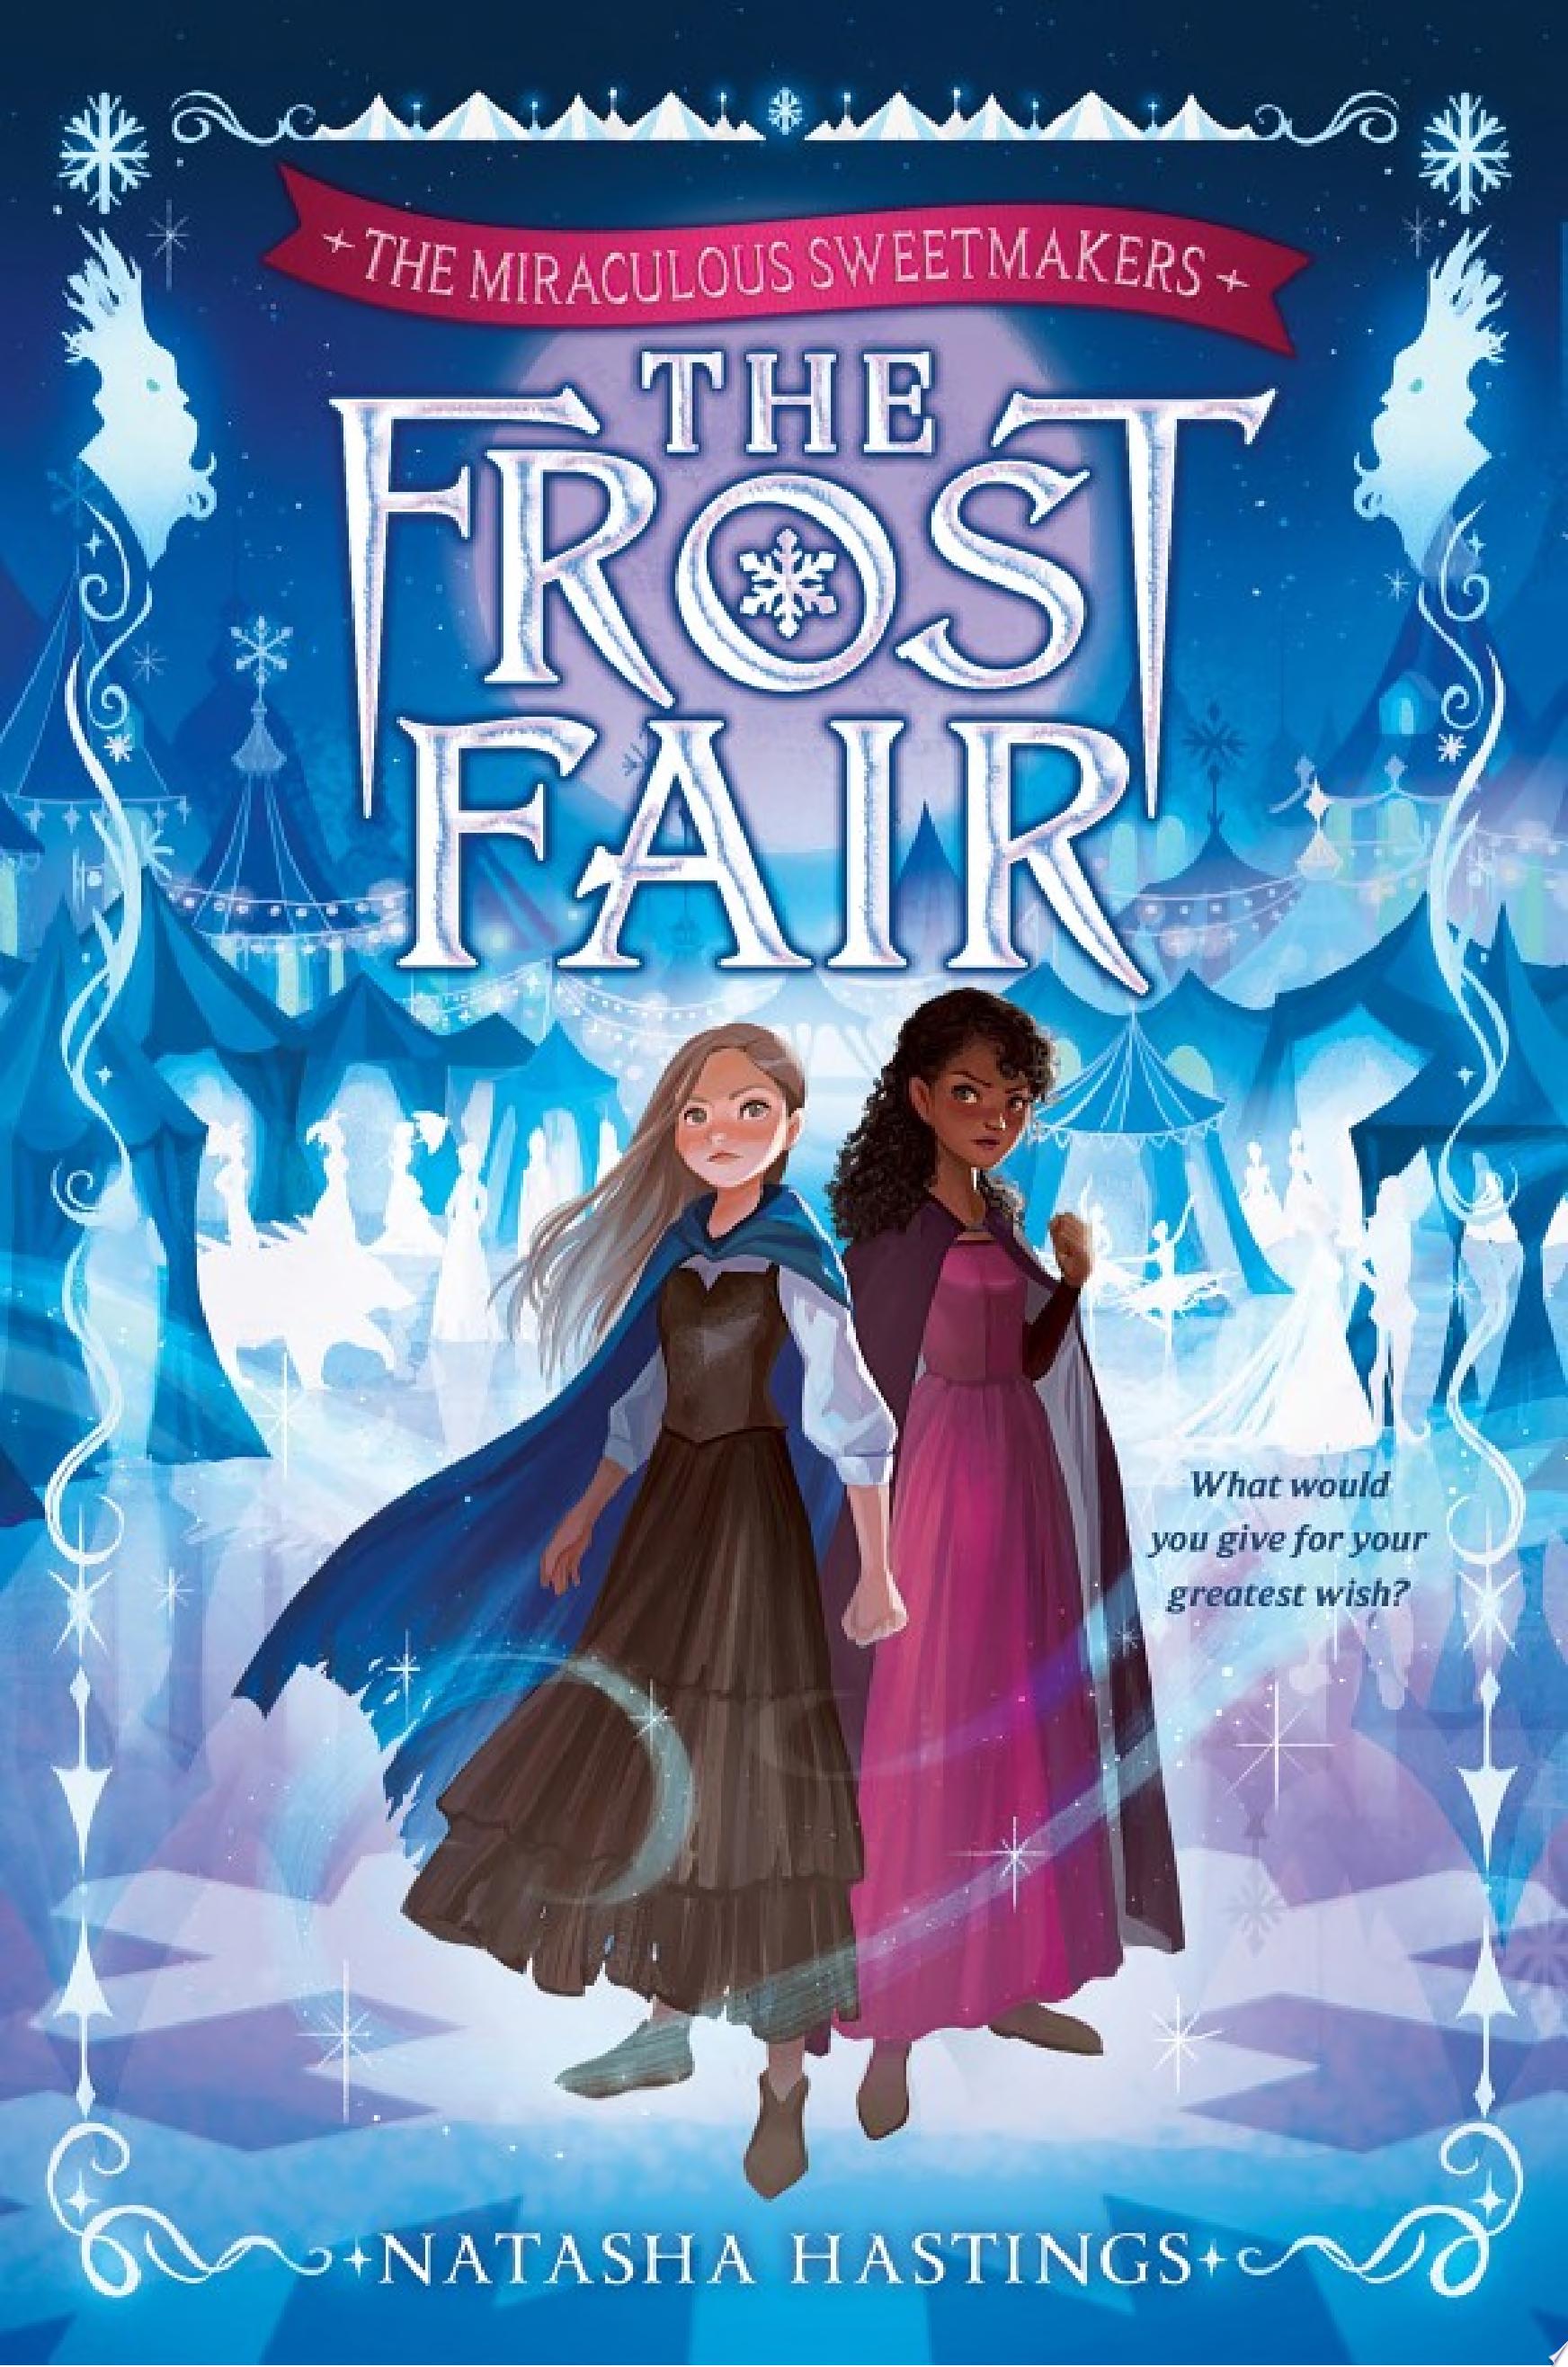 Image for "The Miraculous Sweetmakers #1: The Frost Fair"